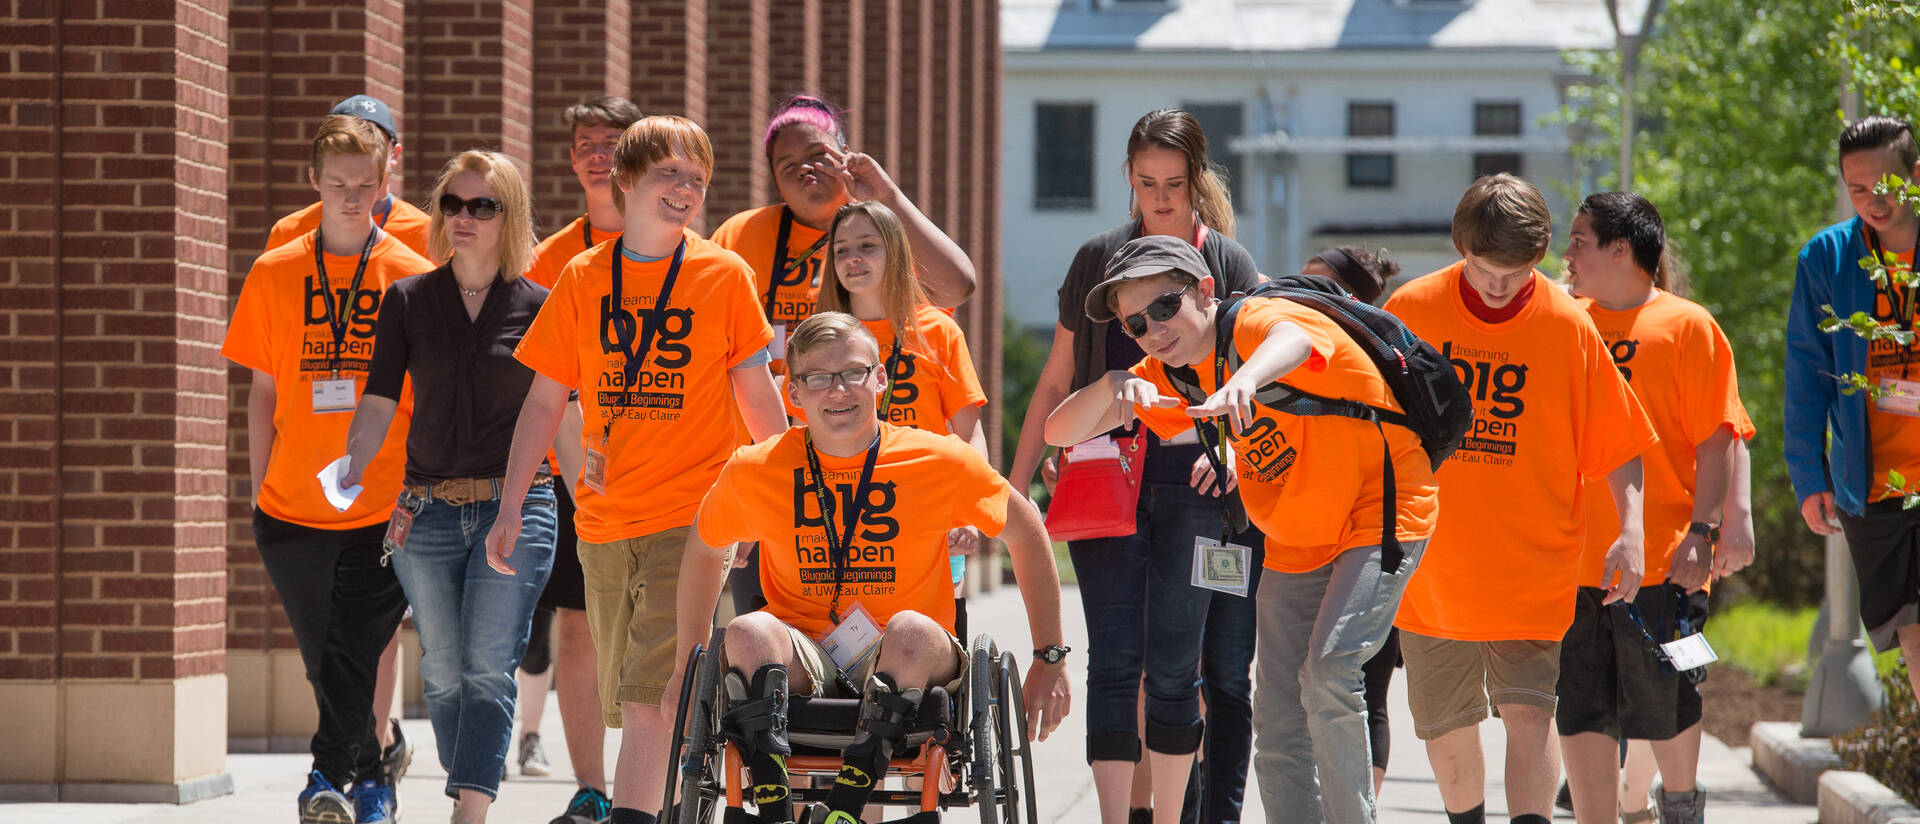 A group of students in bright orange t-shirts are smiling and messing around in front of the camera on a sunny day.